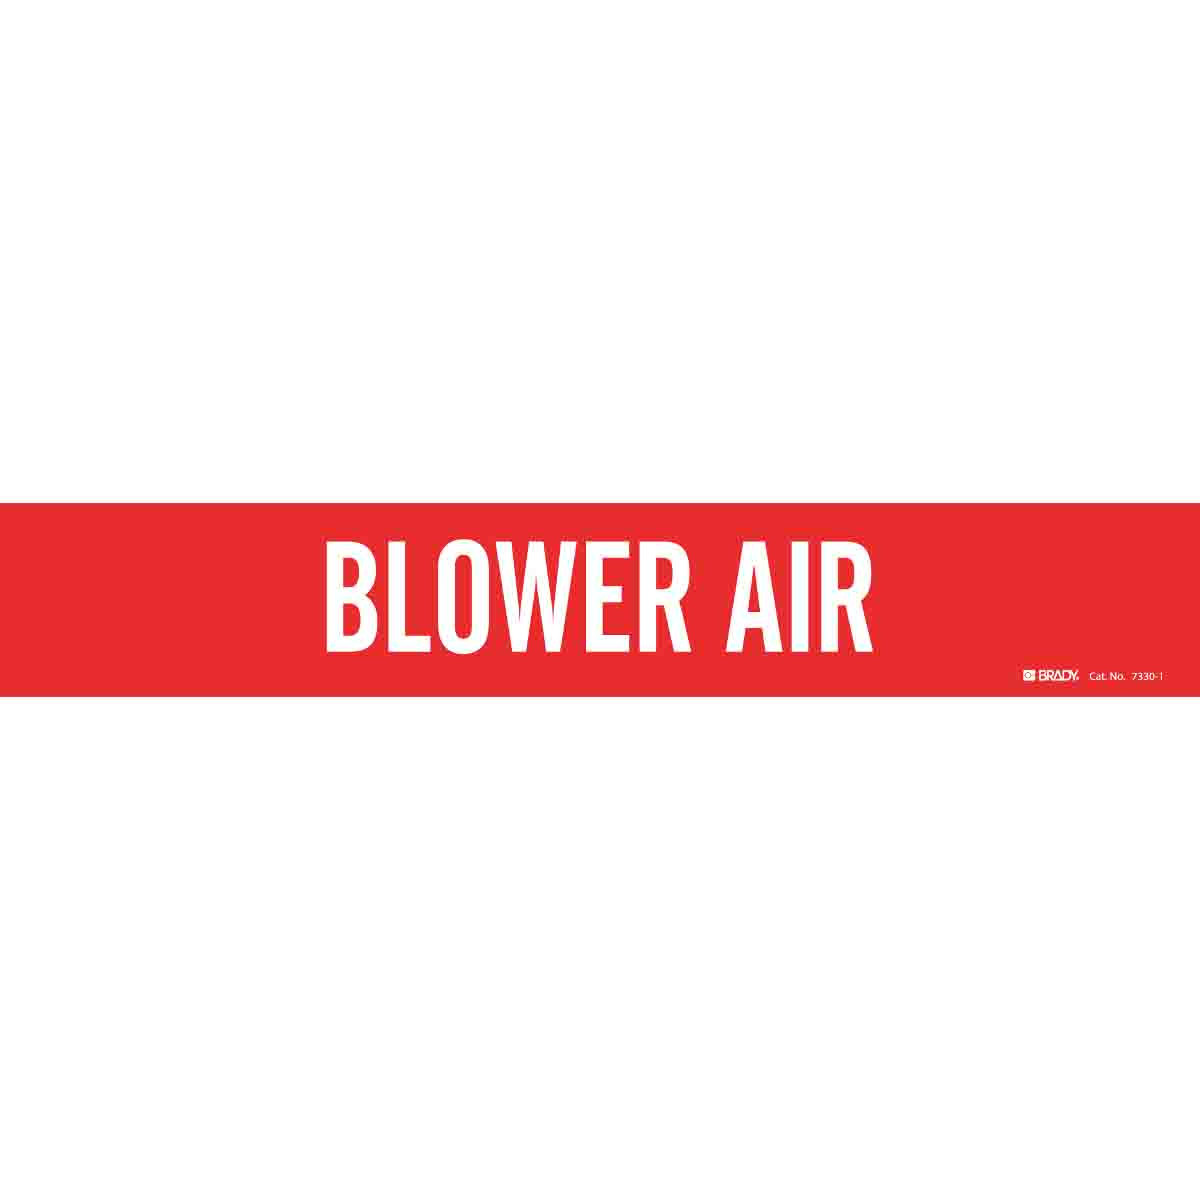 BLOWER AIR WHITE / RED